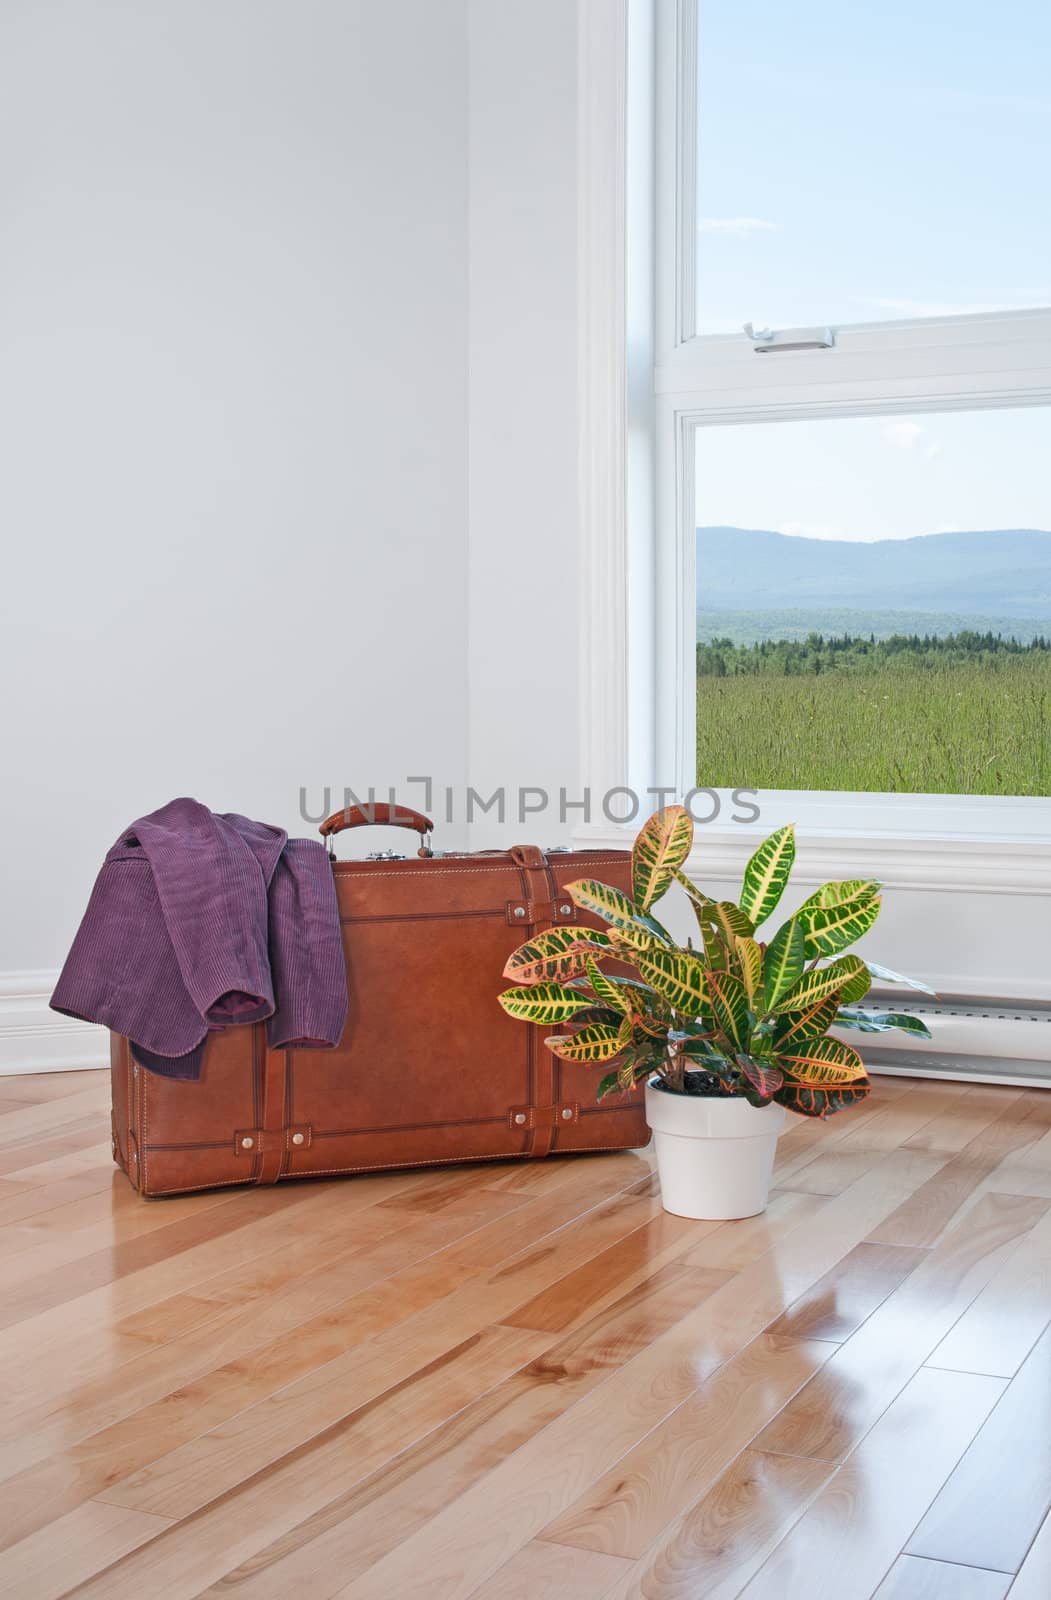 Just arrived. Retro suitcase and plant in an empty room with beautiful view.